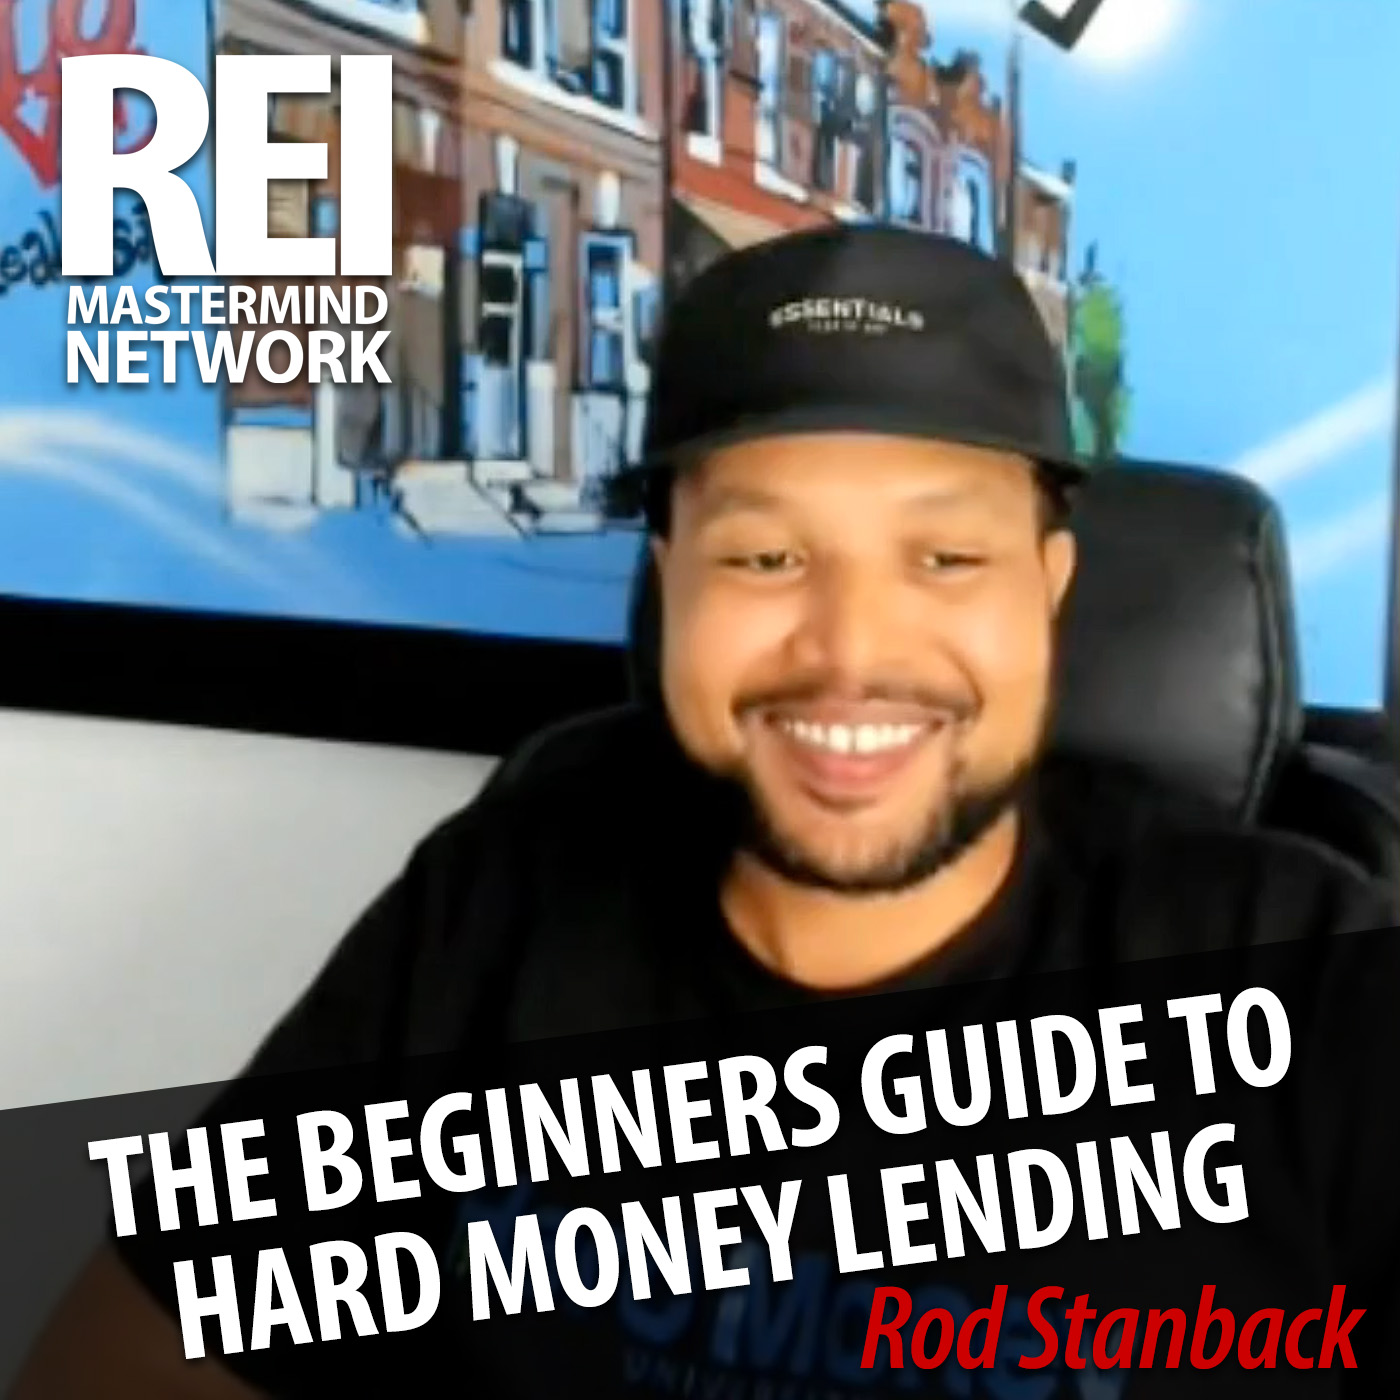 The Beginners Guide to Hard Money Lending with Rod Stanback